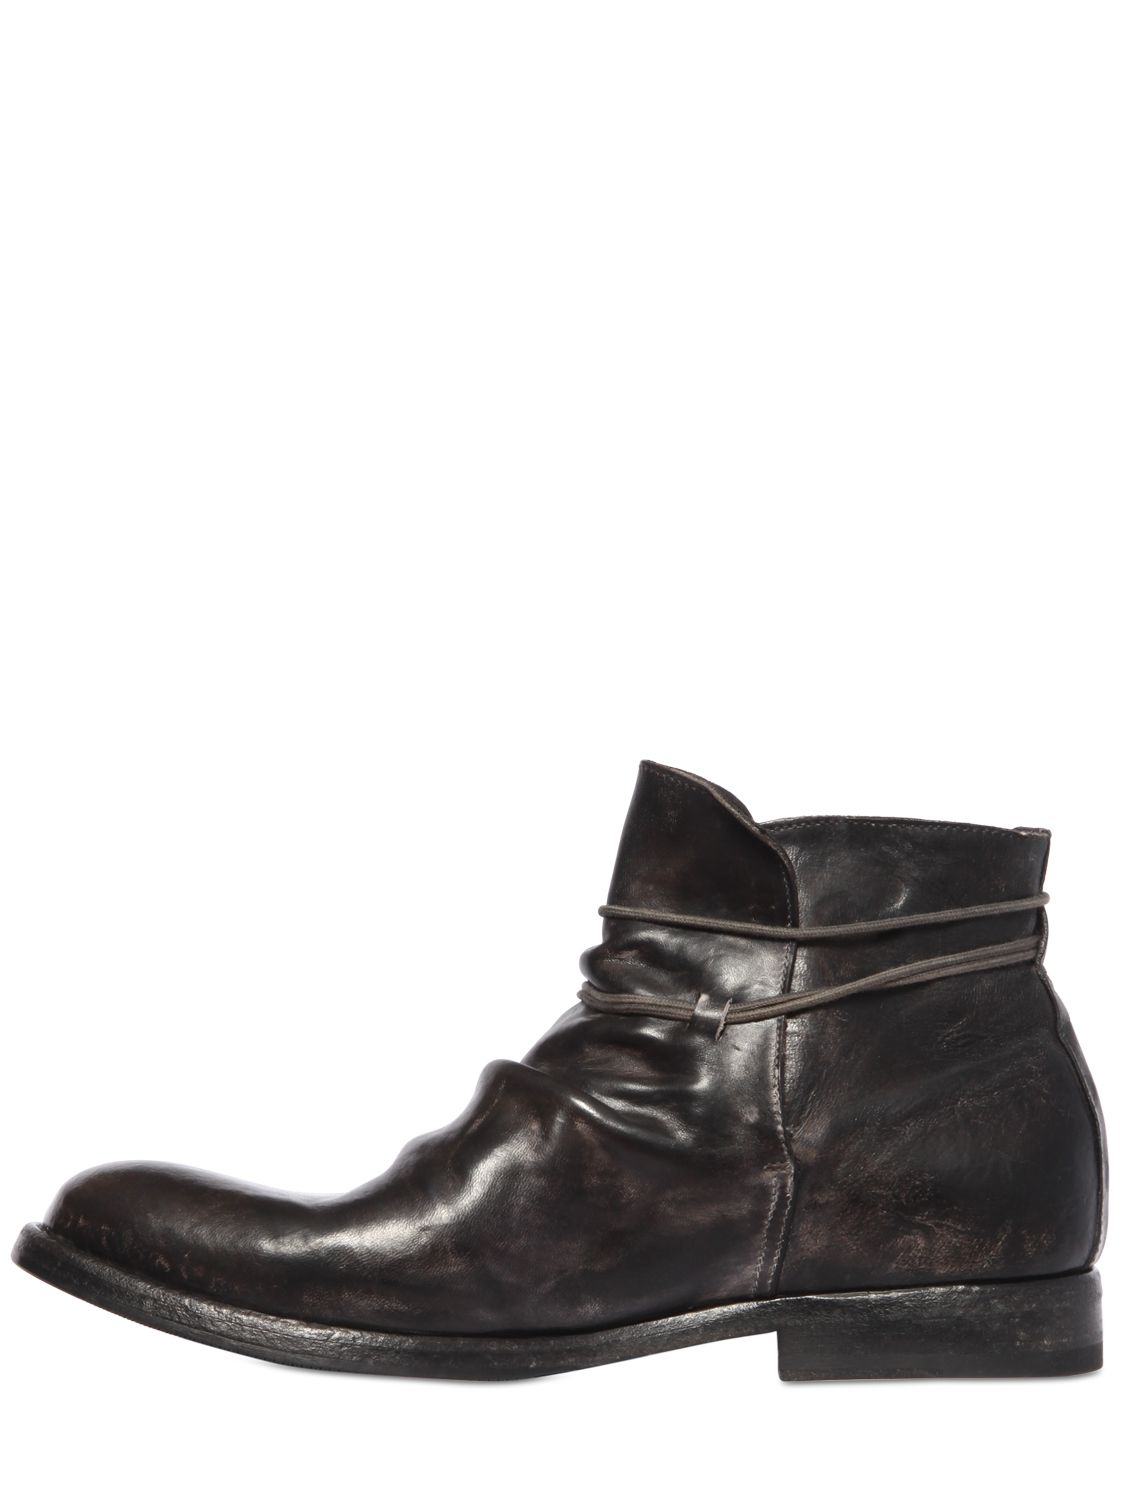 Lyst - Shoto Wrinkled Leather Ankle Boots in Black for Men